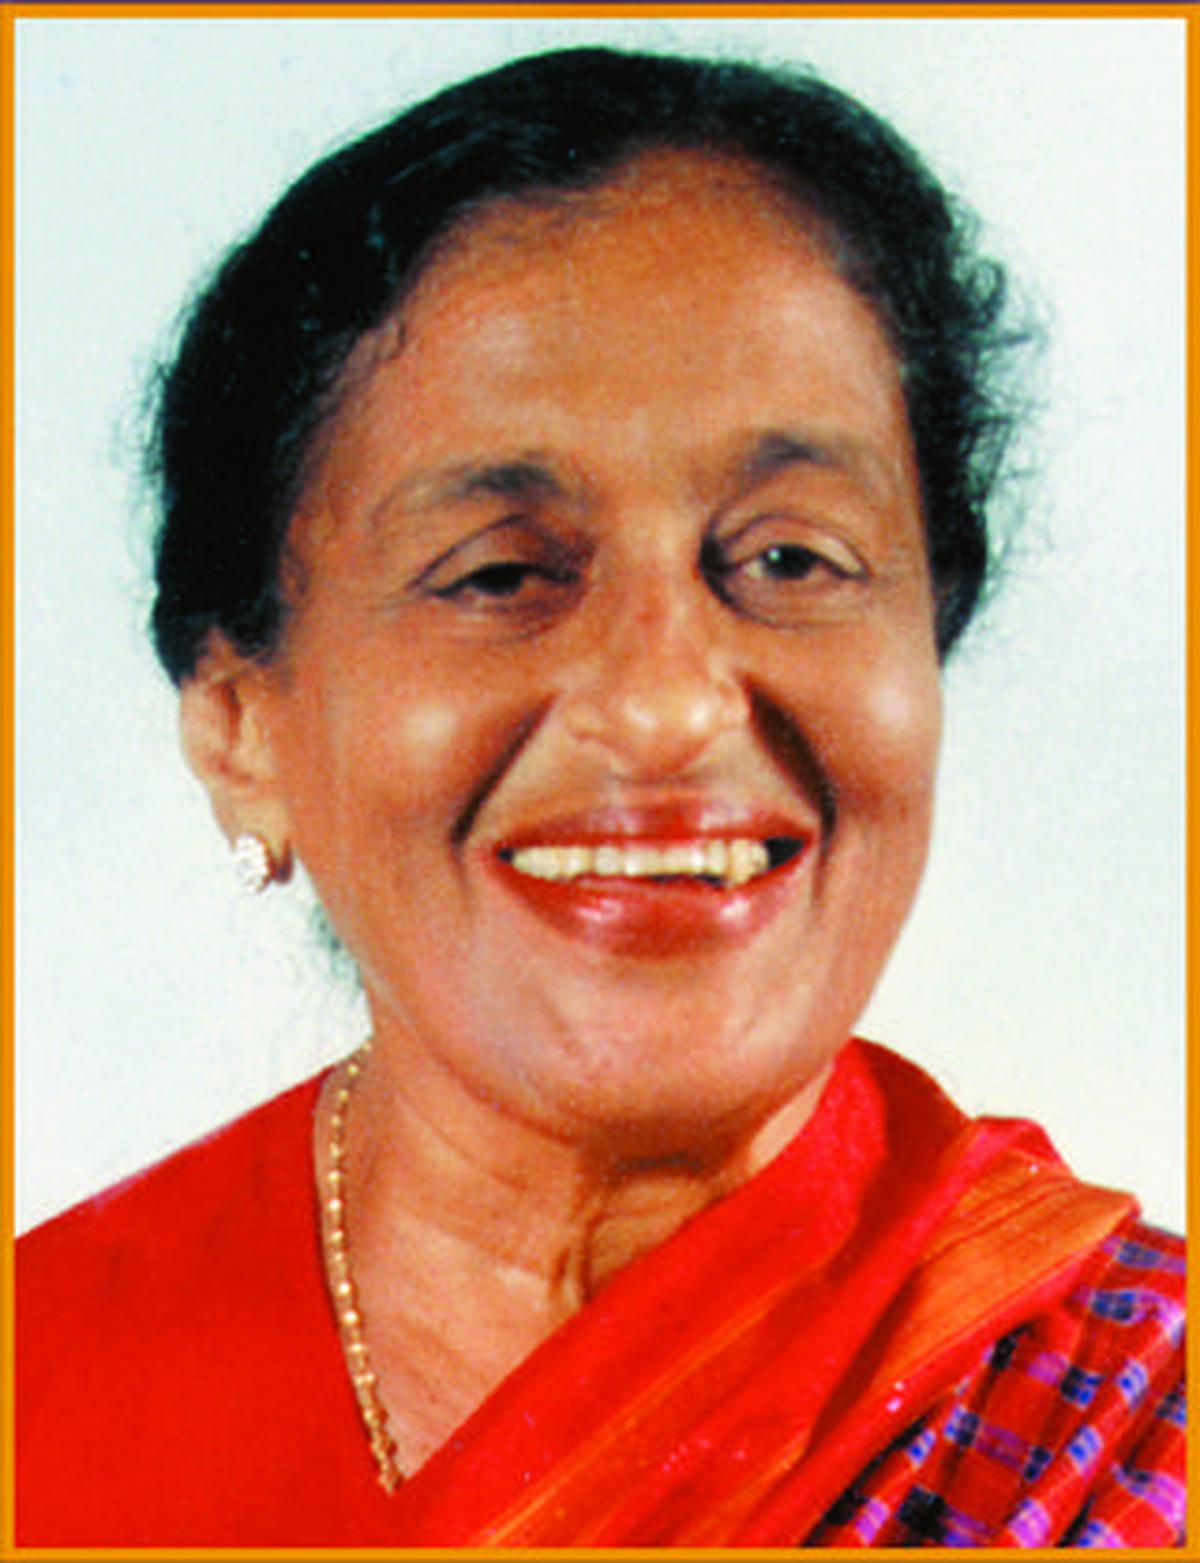 Annamma Mathew authored 25+ cookbooks, including the bestseller Flavours of the Spice Court.